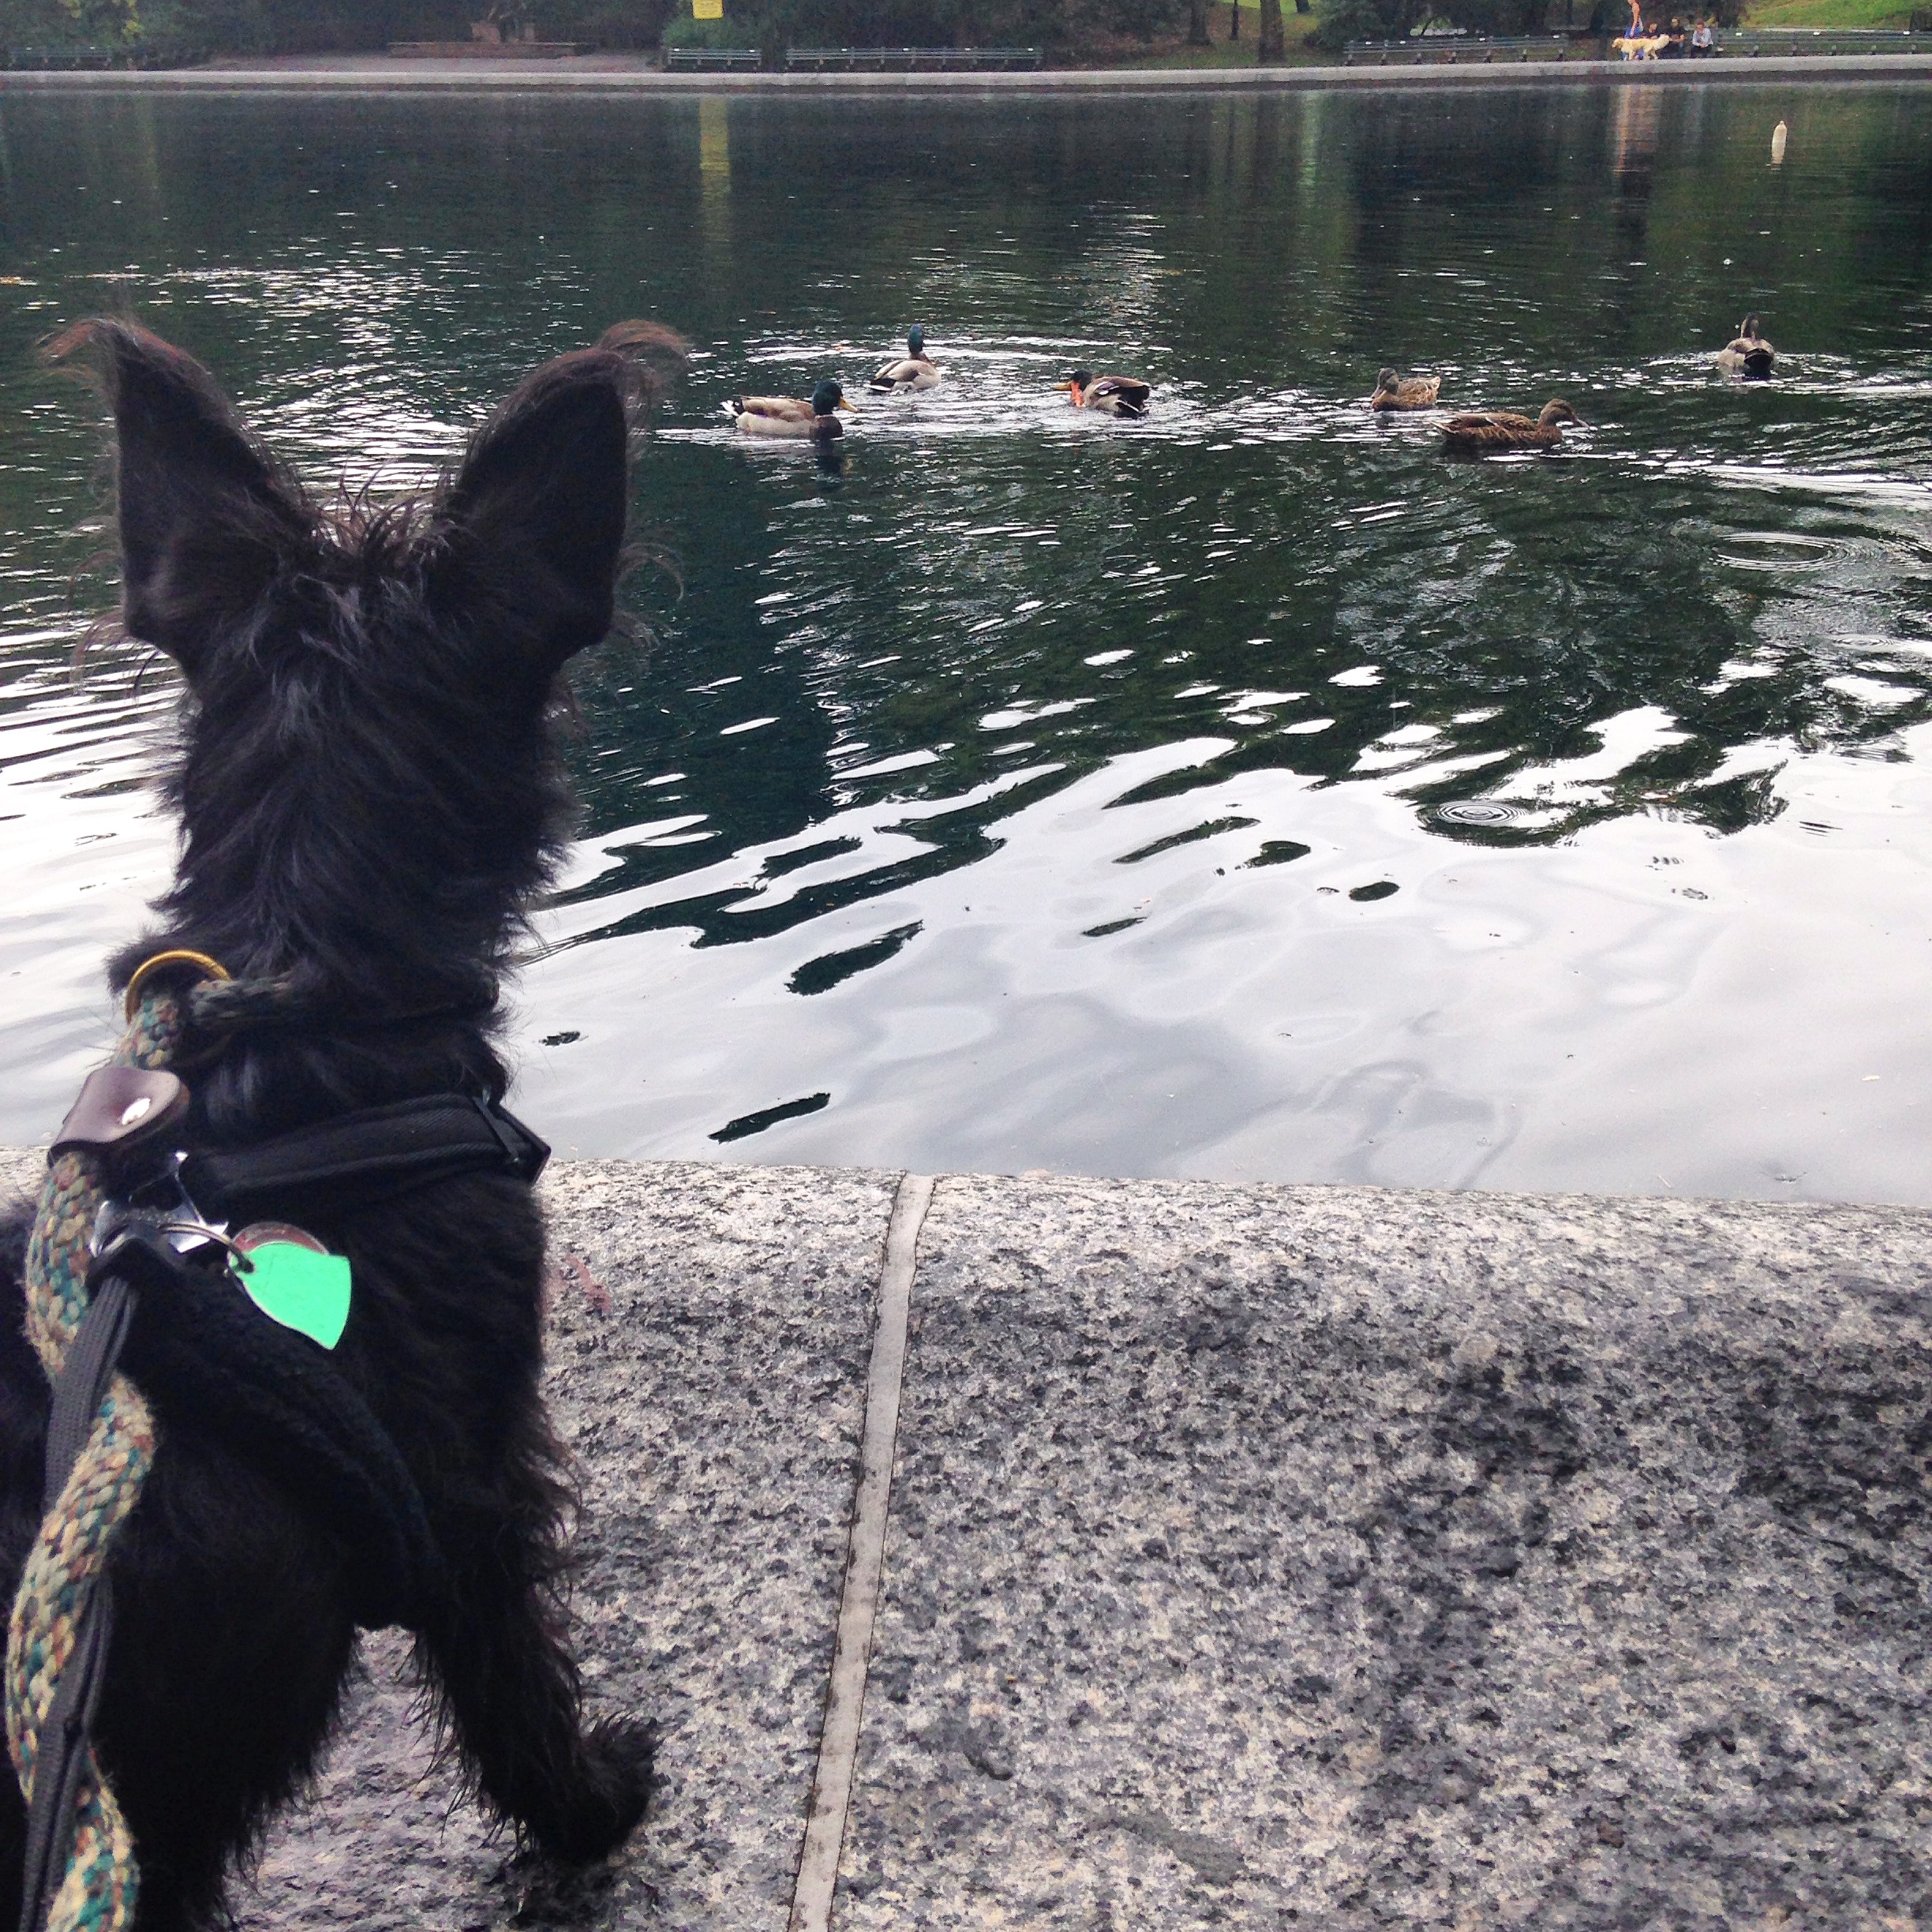 Black terrier type puppy looking at some ducks in a fountain